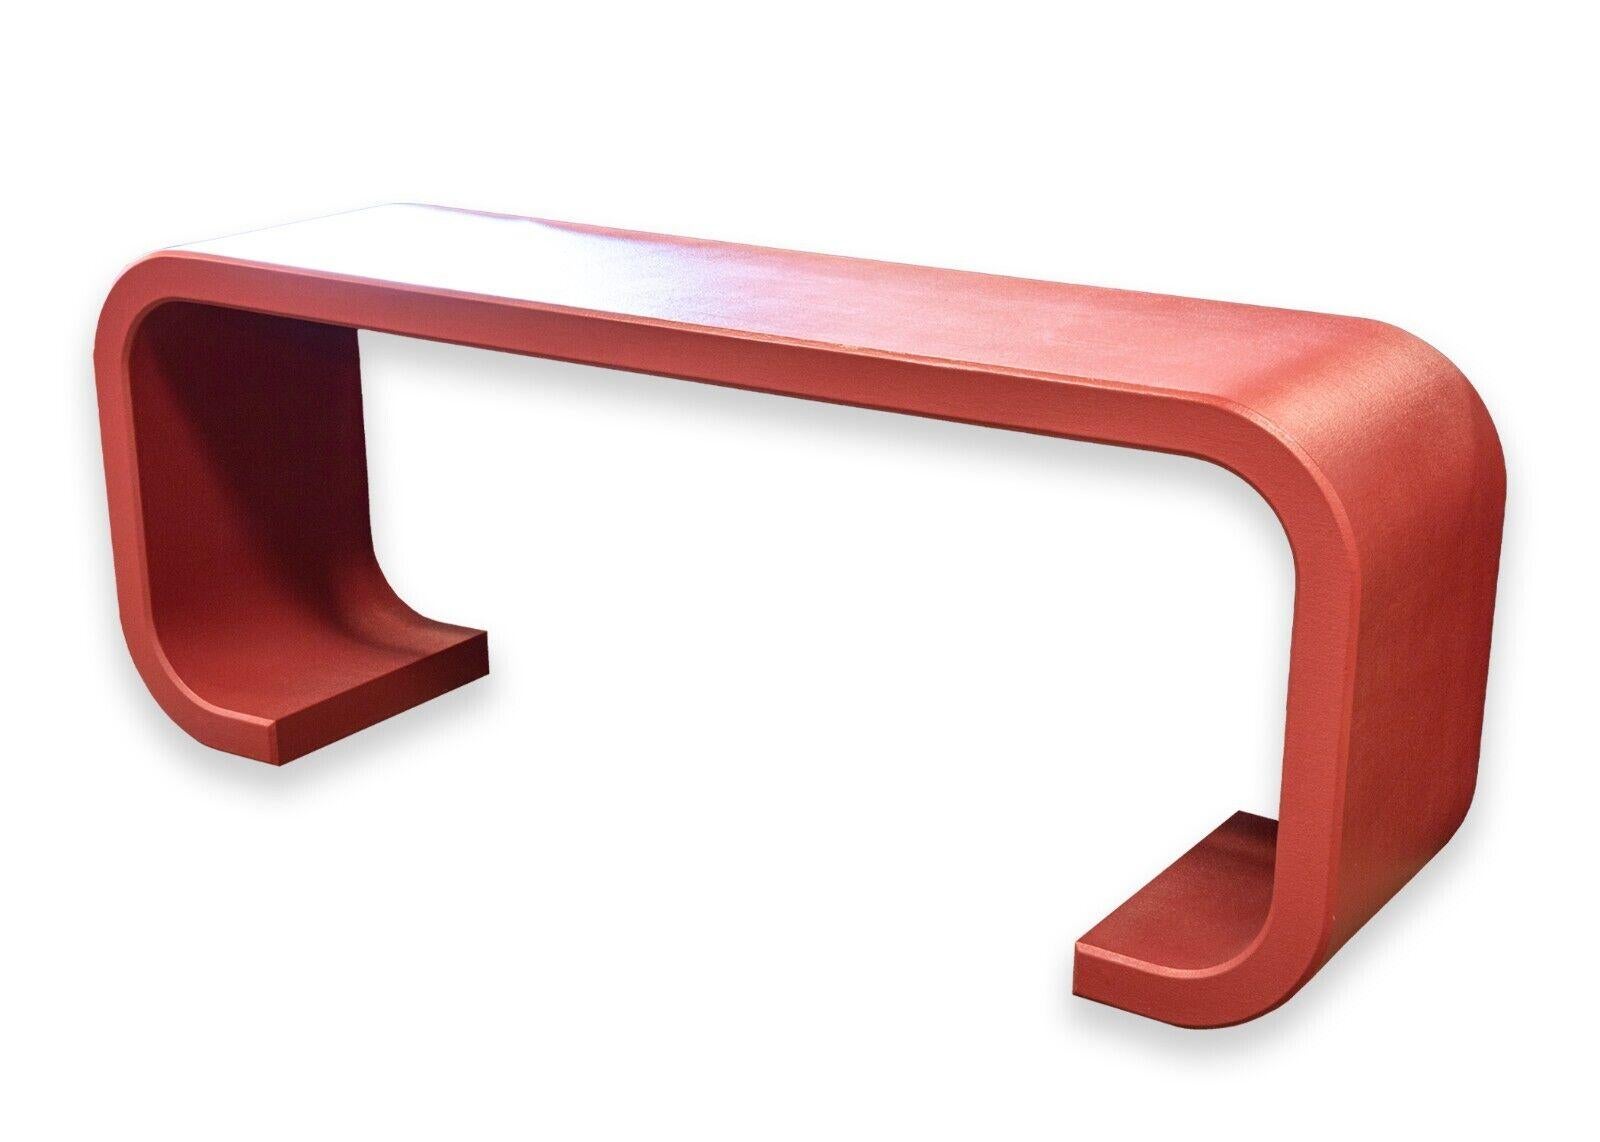 A post modern red waterfall console table. A lovely console table with a classic post modern design. This piece features a rich, deep red color finish and a waterfall design. This piece is in very good condition. It measures 27.75 in tall, 72 in